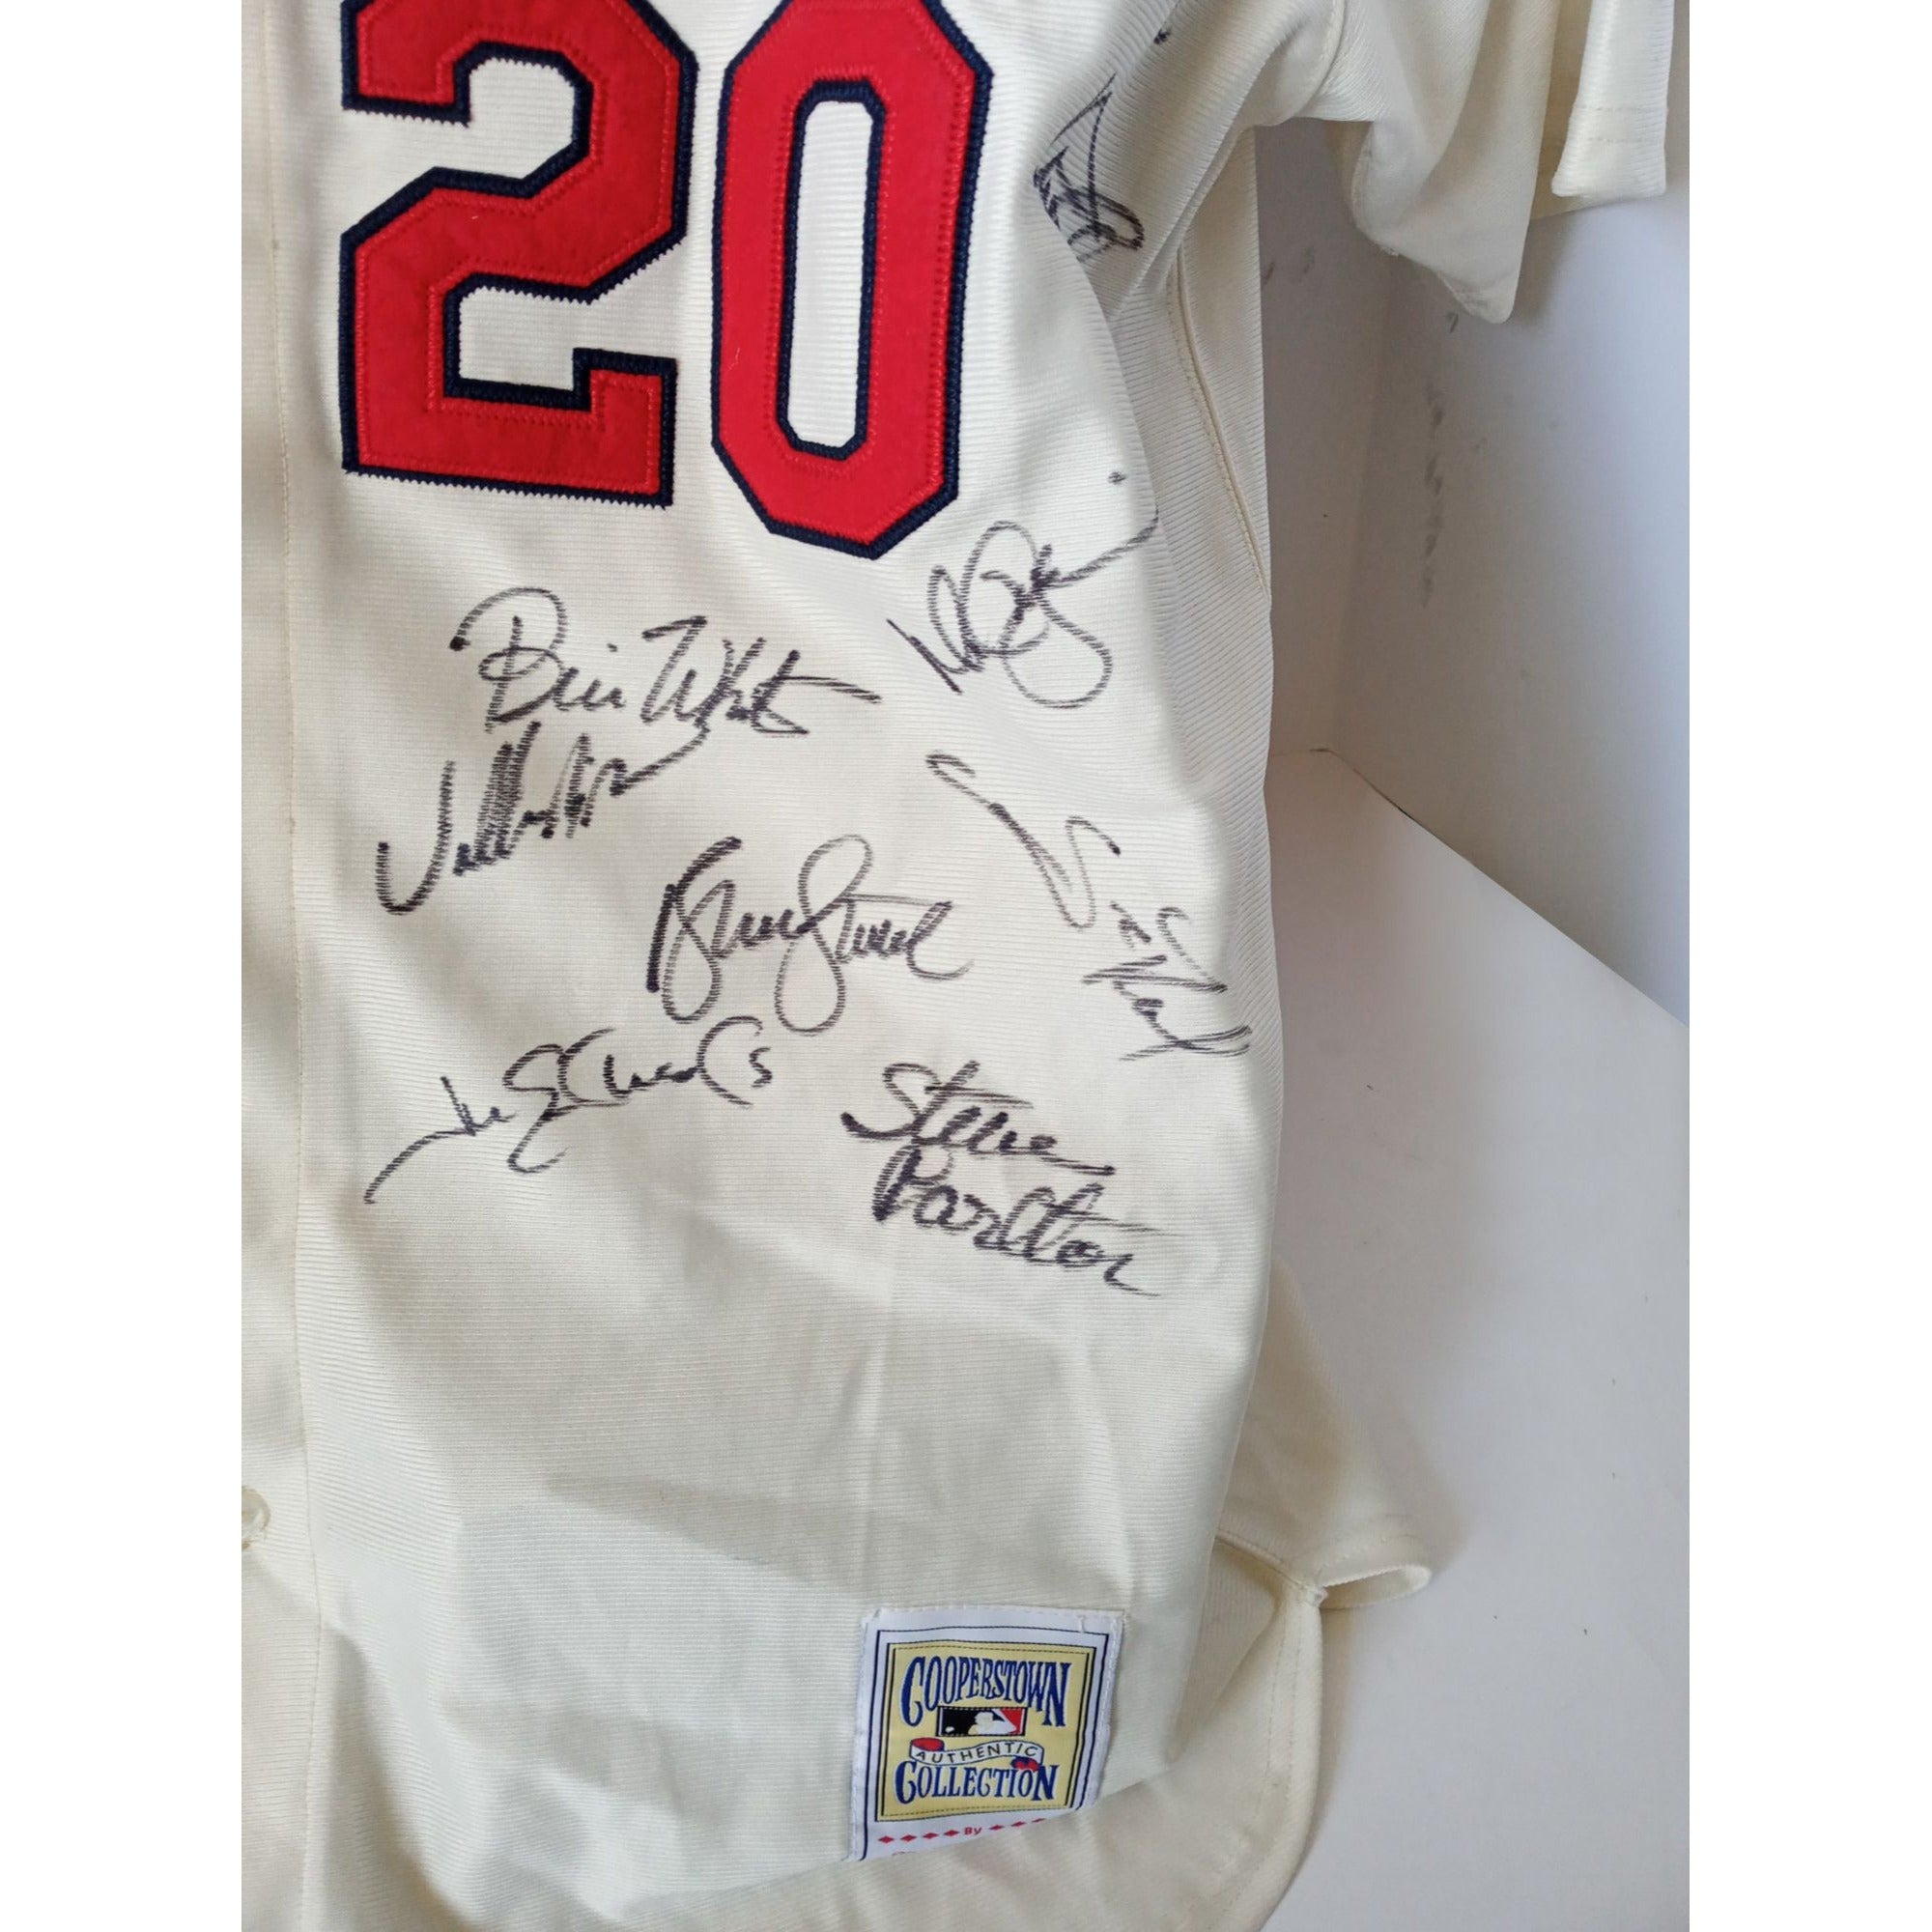 Awesome Artifacts St. Louis Cardinals Lou Brock, Bob Gibson Stan Musial All-Time Greats Signed Jersey with Proof by Awesome Artifact